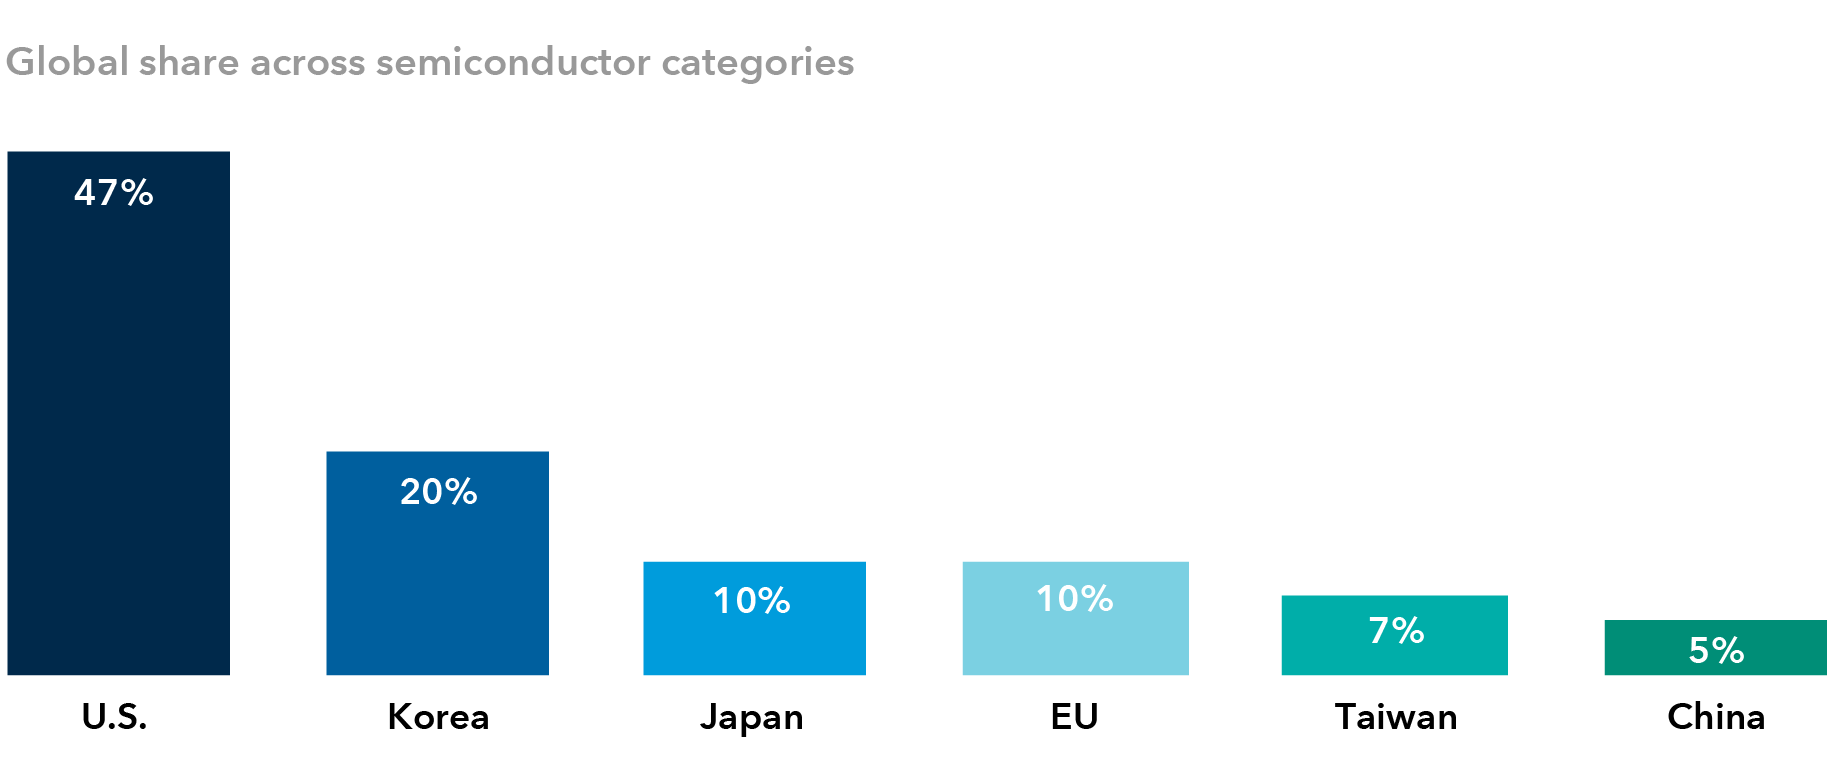 Chart shows global market share across all semiconductor categories. The U.S. holds 47% share. Korea holds 20% share. Japan and EU hold 10% share. Taiwan holds 7% share. China holds 5% share. Figures based on 2020 data. Source: Semiconductor Industry Association.